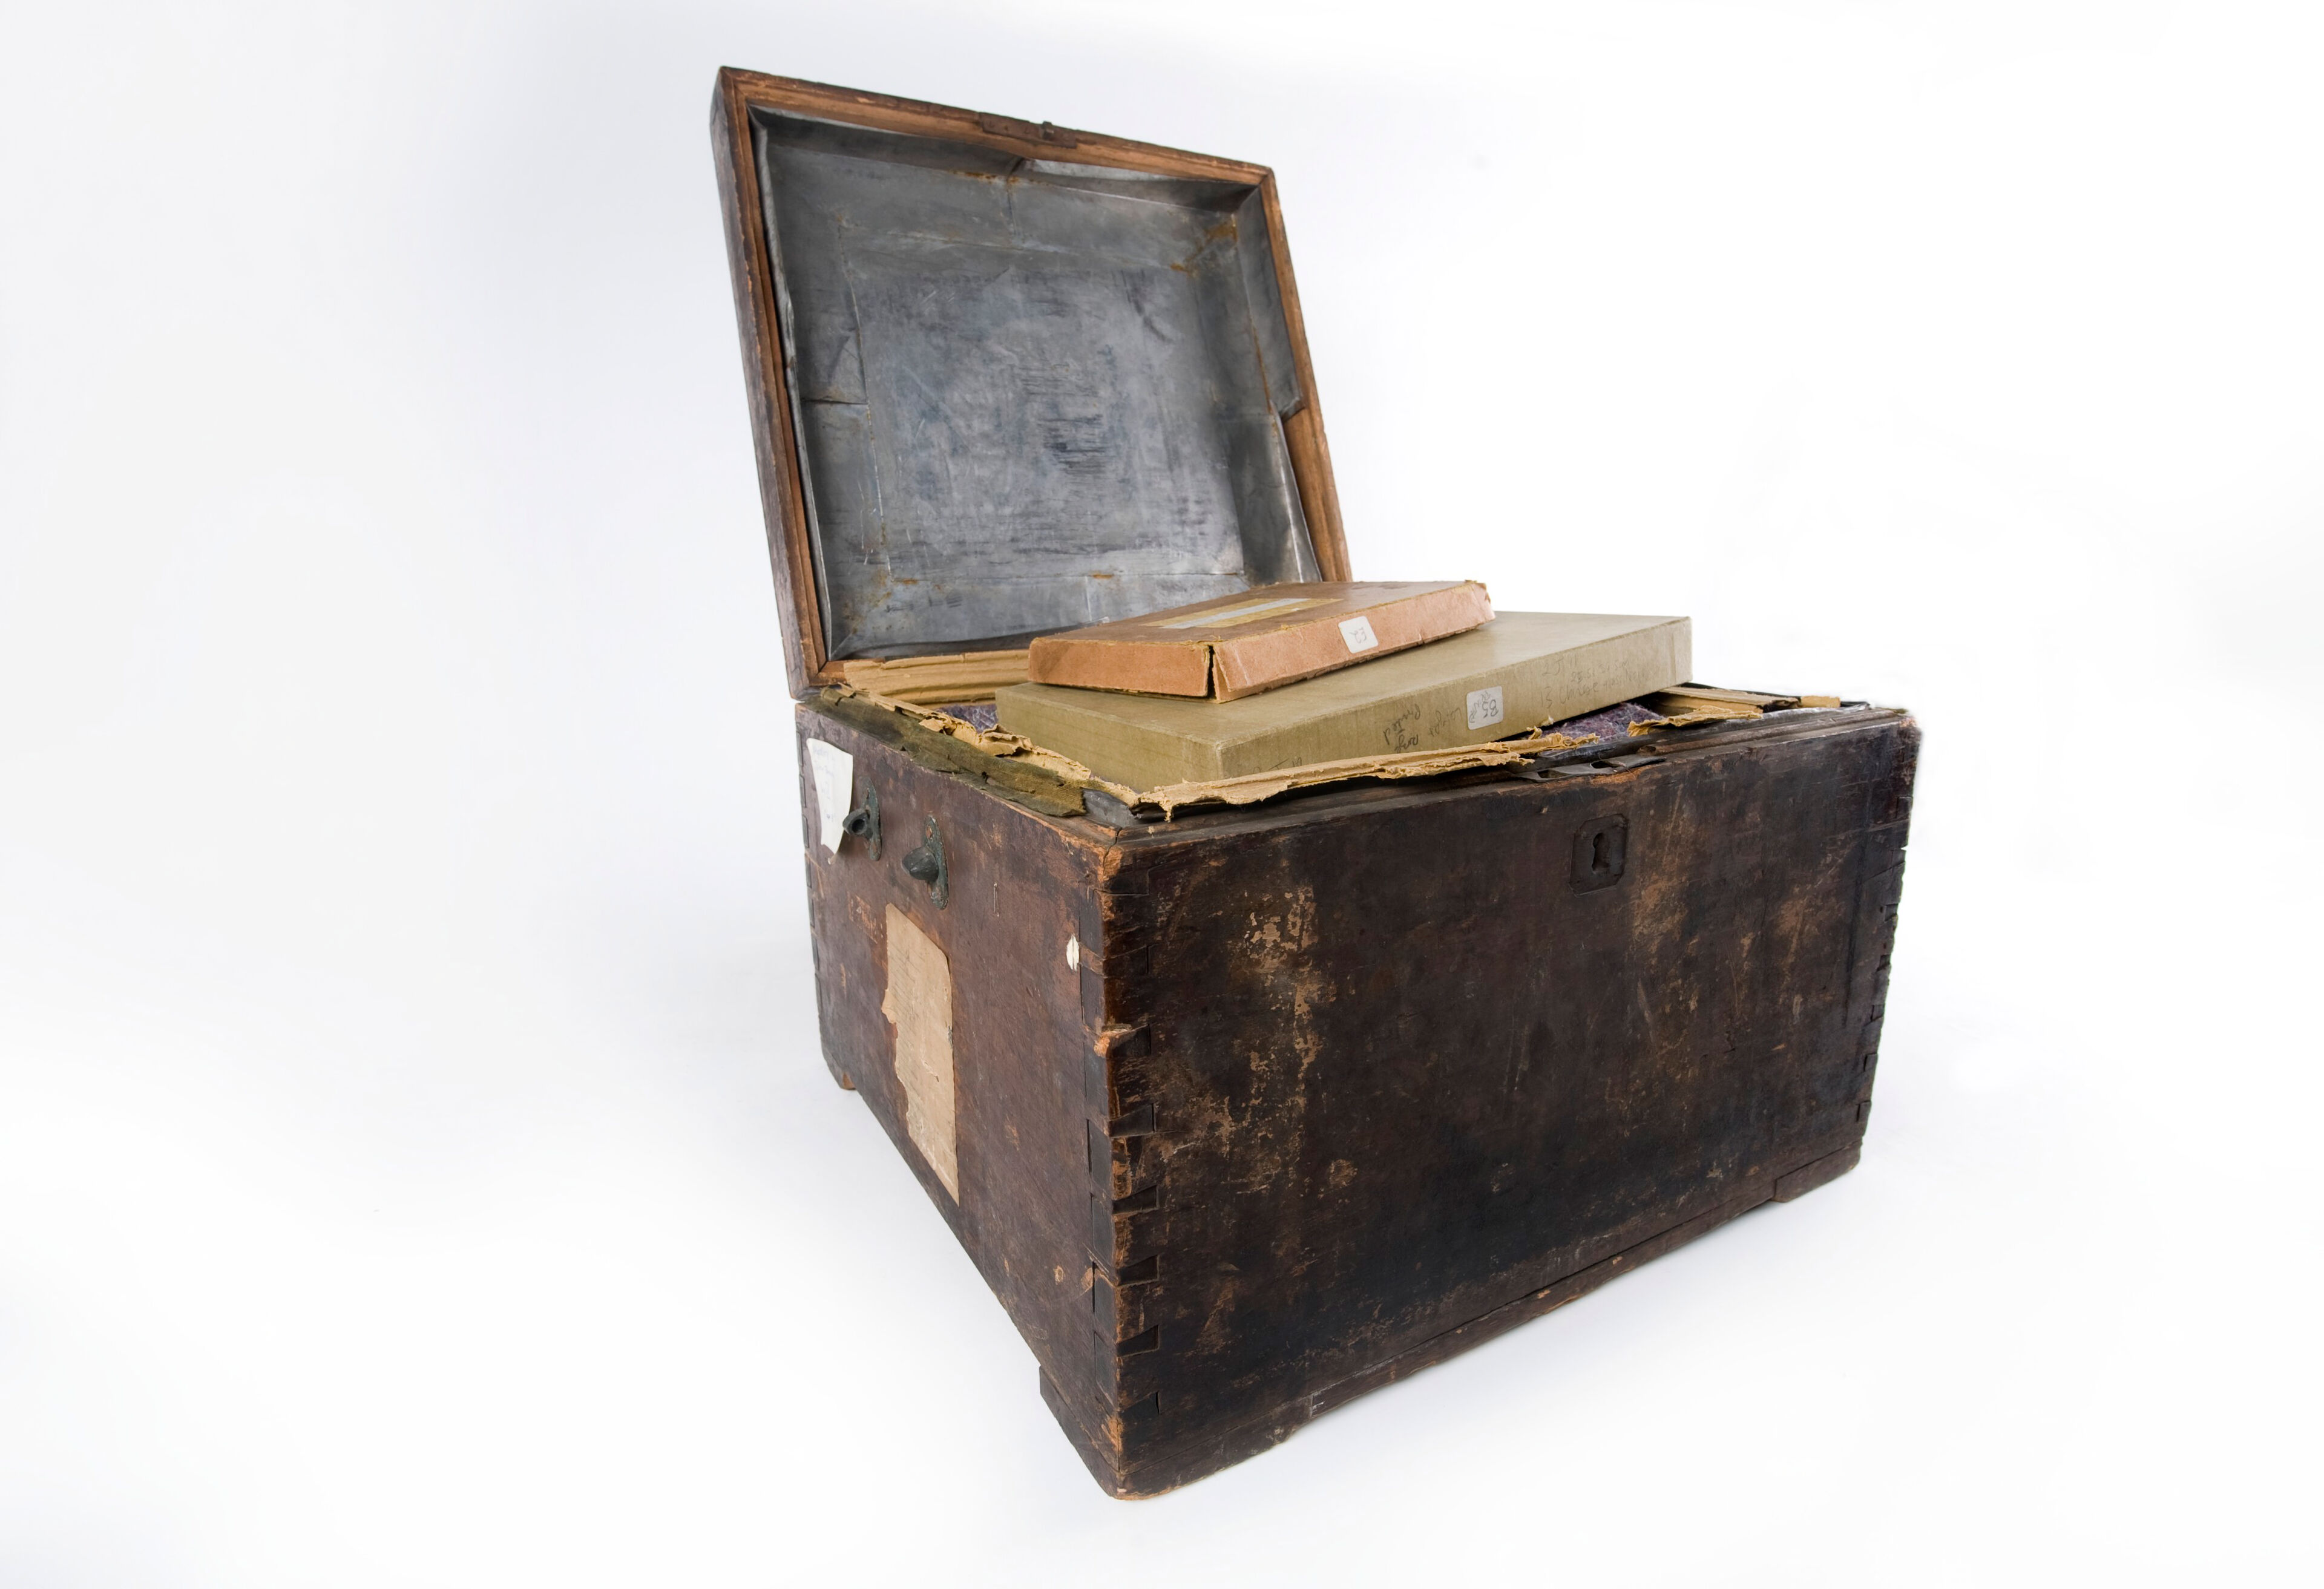 One of the chests which the photographer John Thomson (1837-1921) used to carry his glass negatives. Wood and metal, 18--.